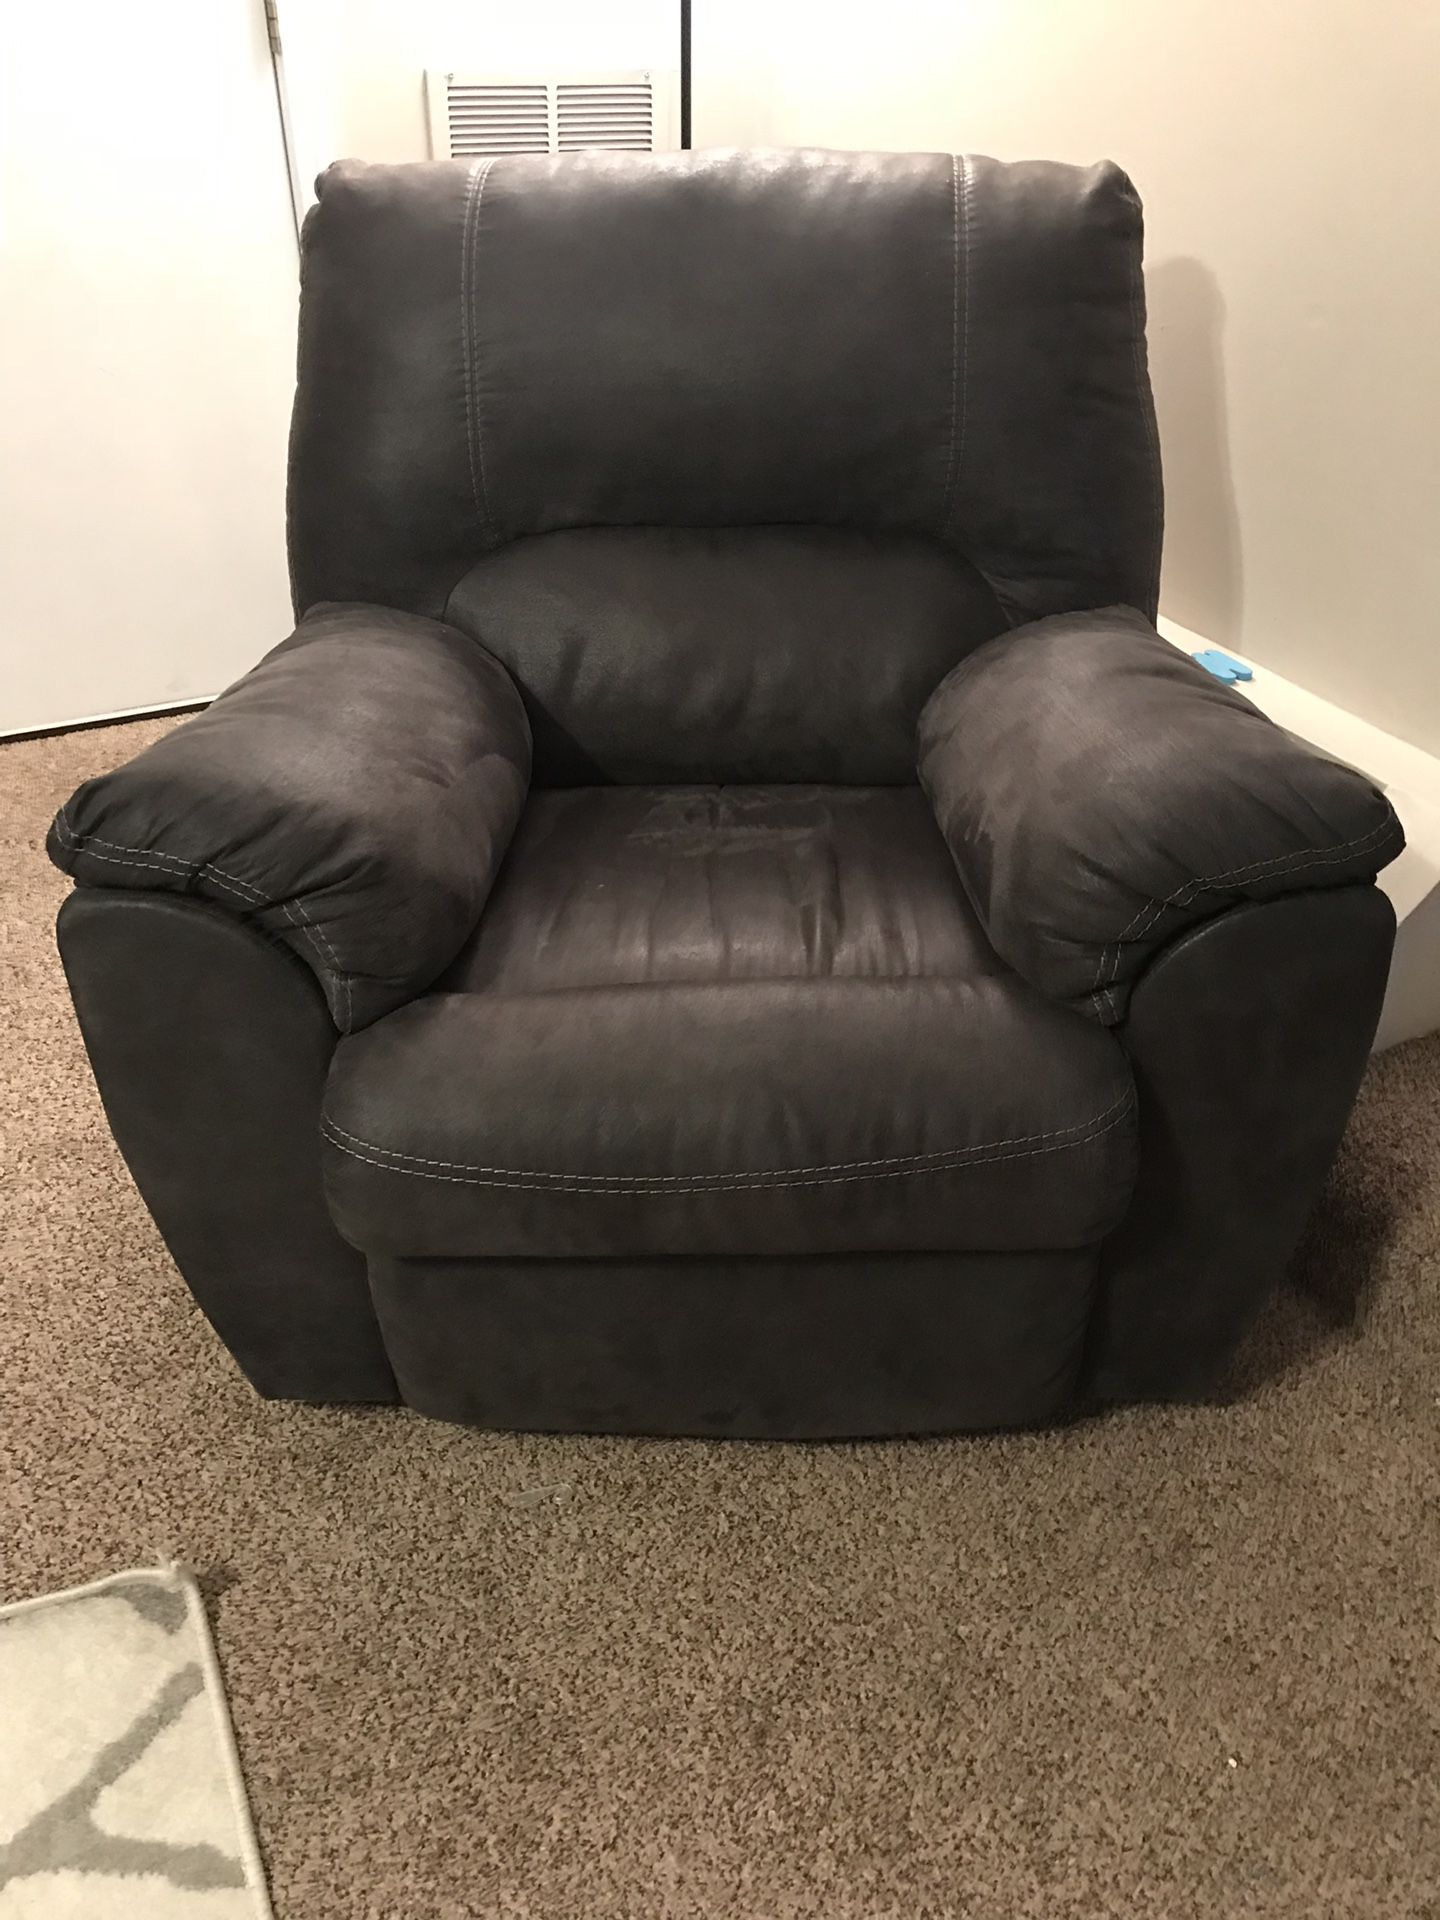 Recliner from Ashley furniture